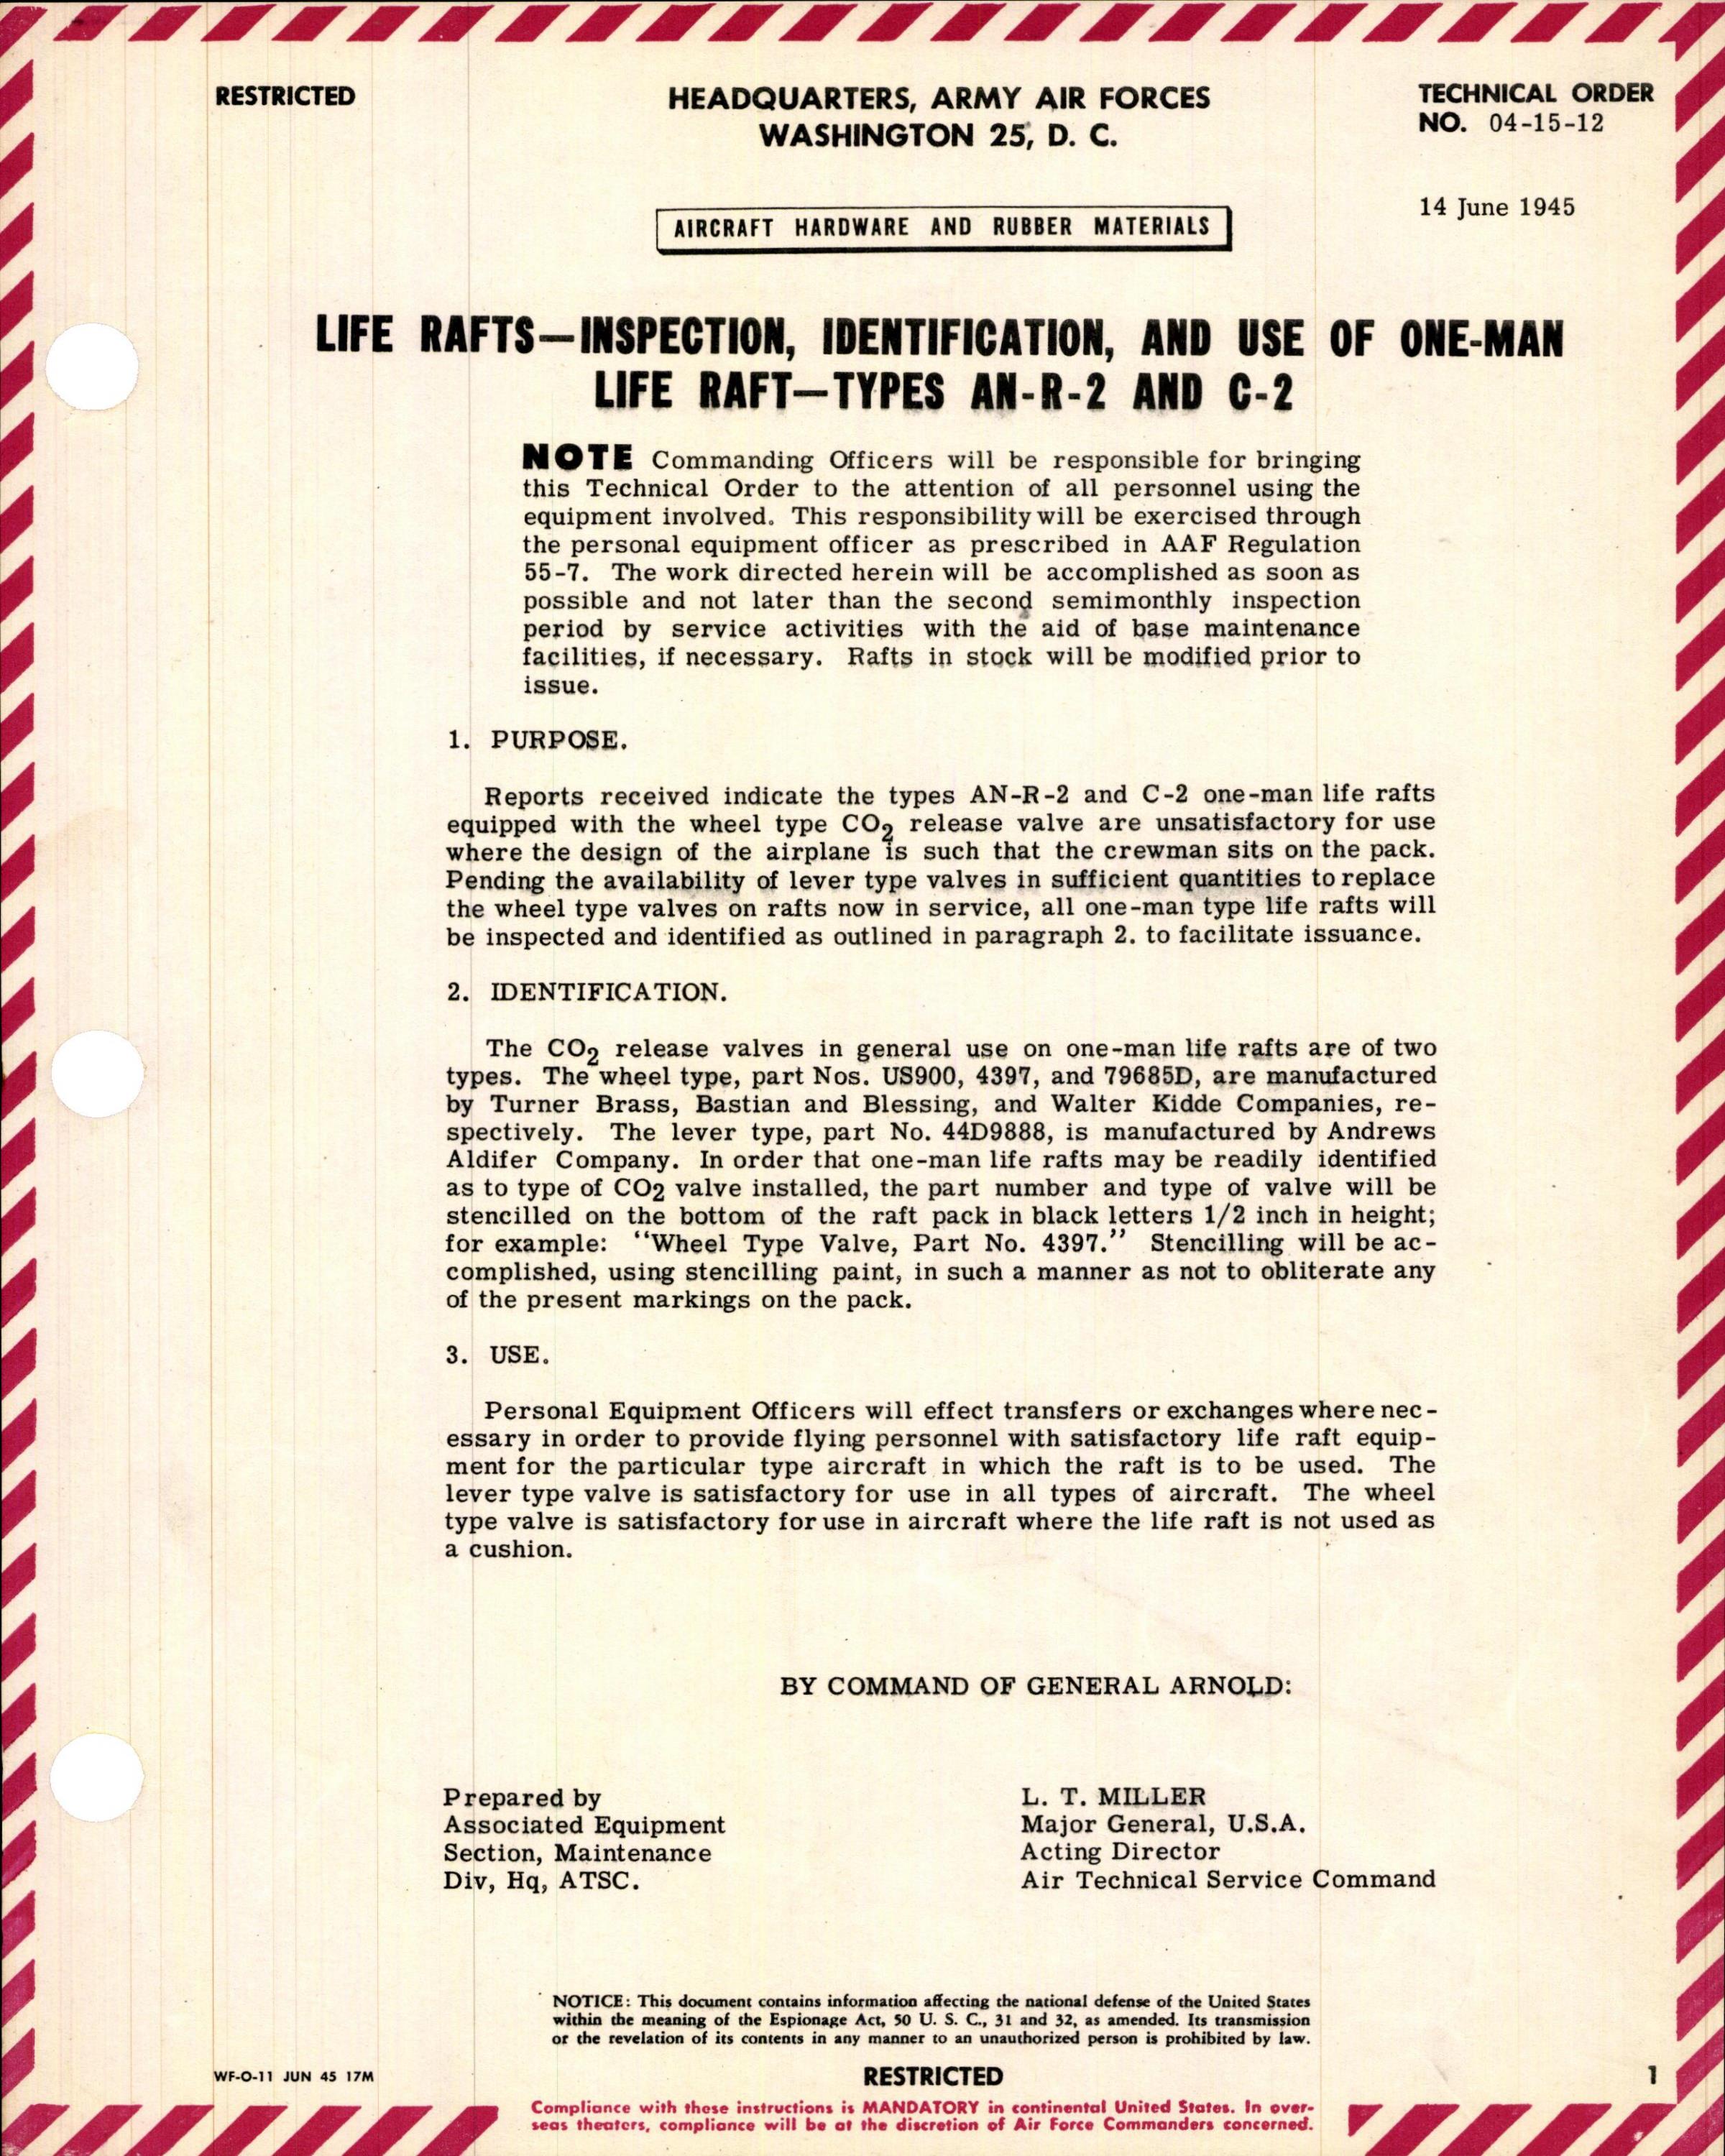 Sample page 1 from AirCorps Library document: Inspection, Identification, and Use of One-Man Life Rafts, Types AN-R-2 and C-2